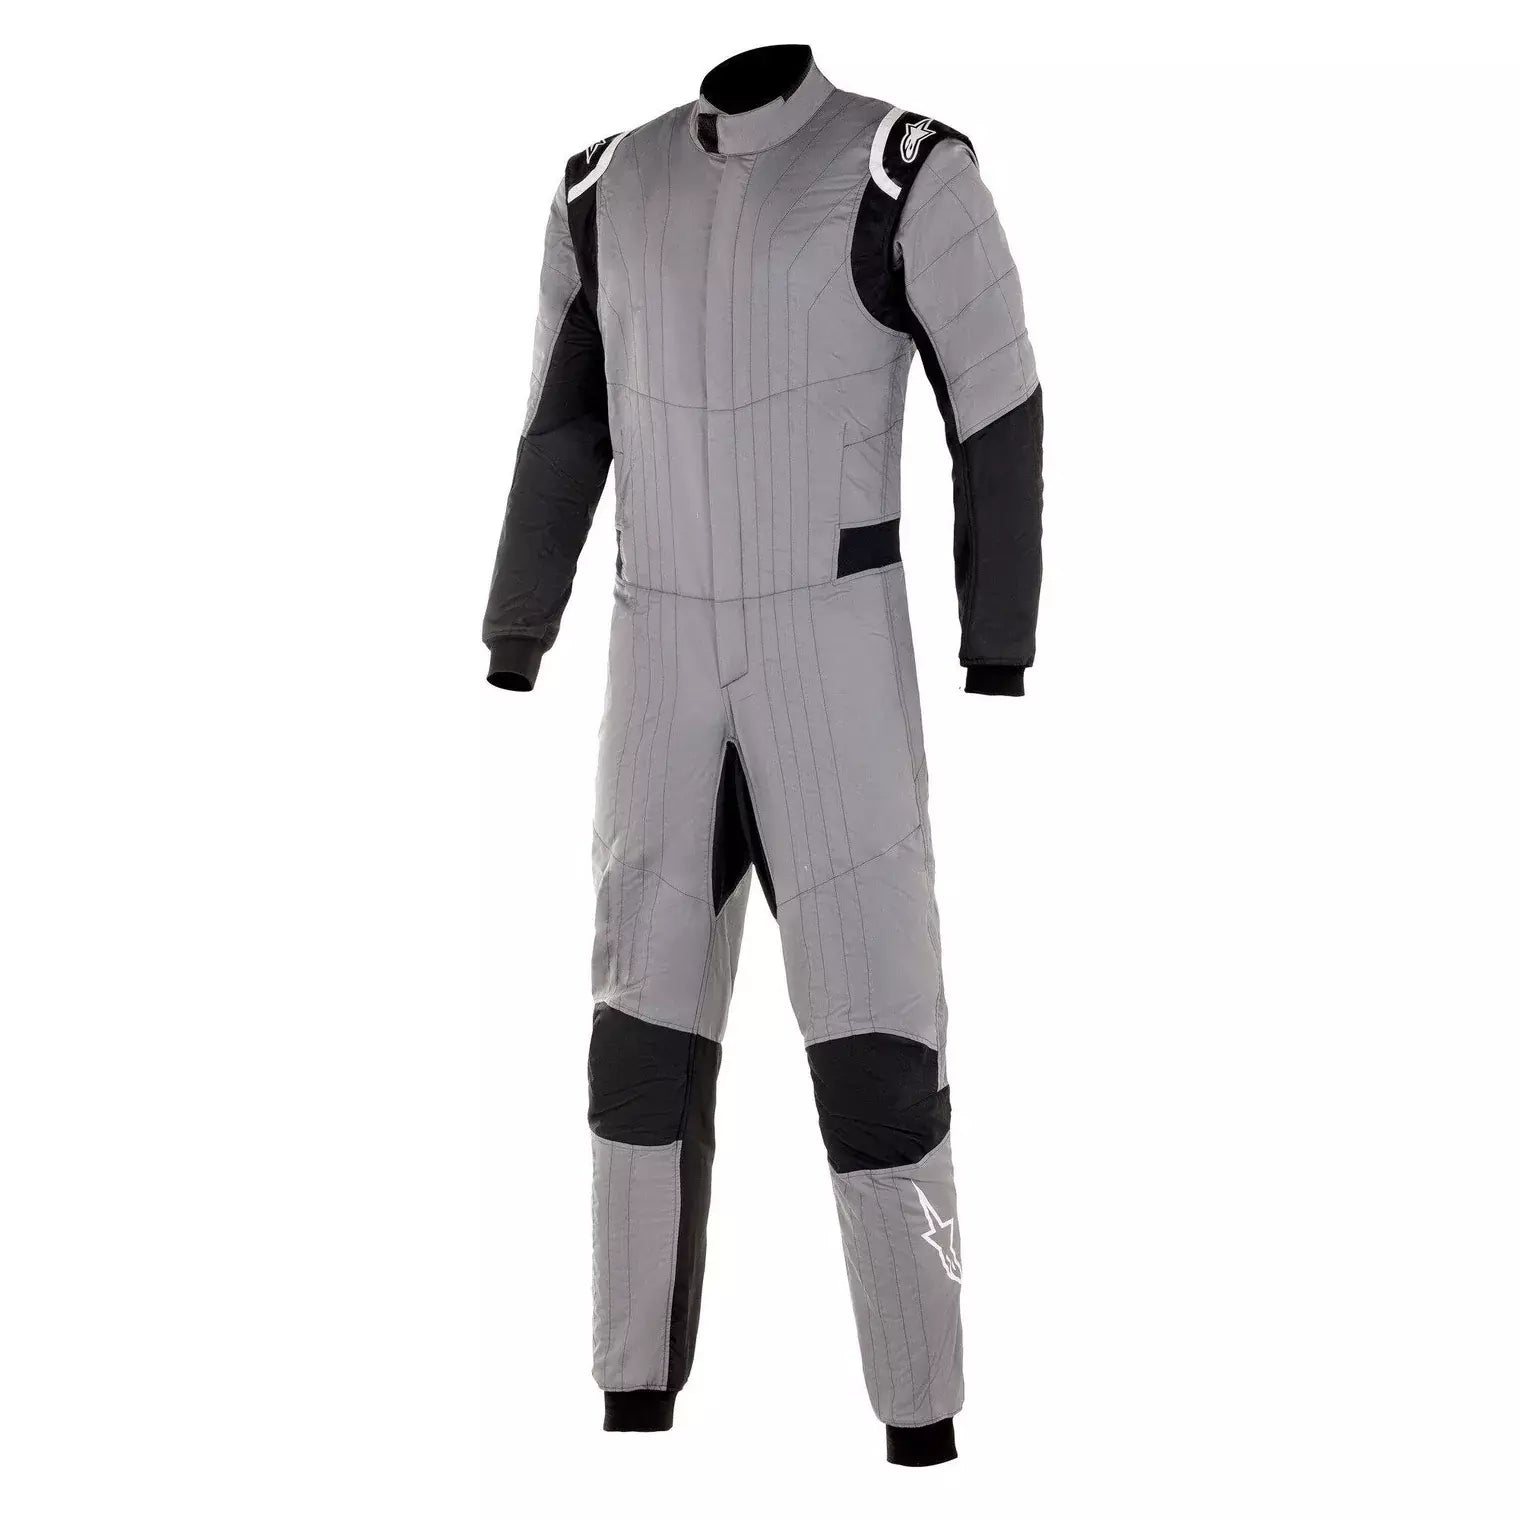 Alpinestars Suit Hypertech V2 Gray Small / Medium Safety Clothing Driving Suits main image